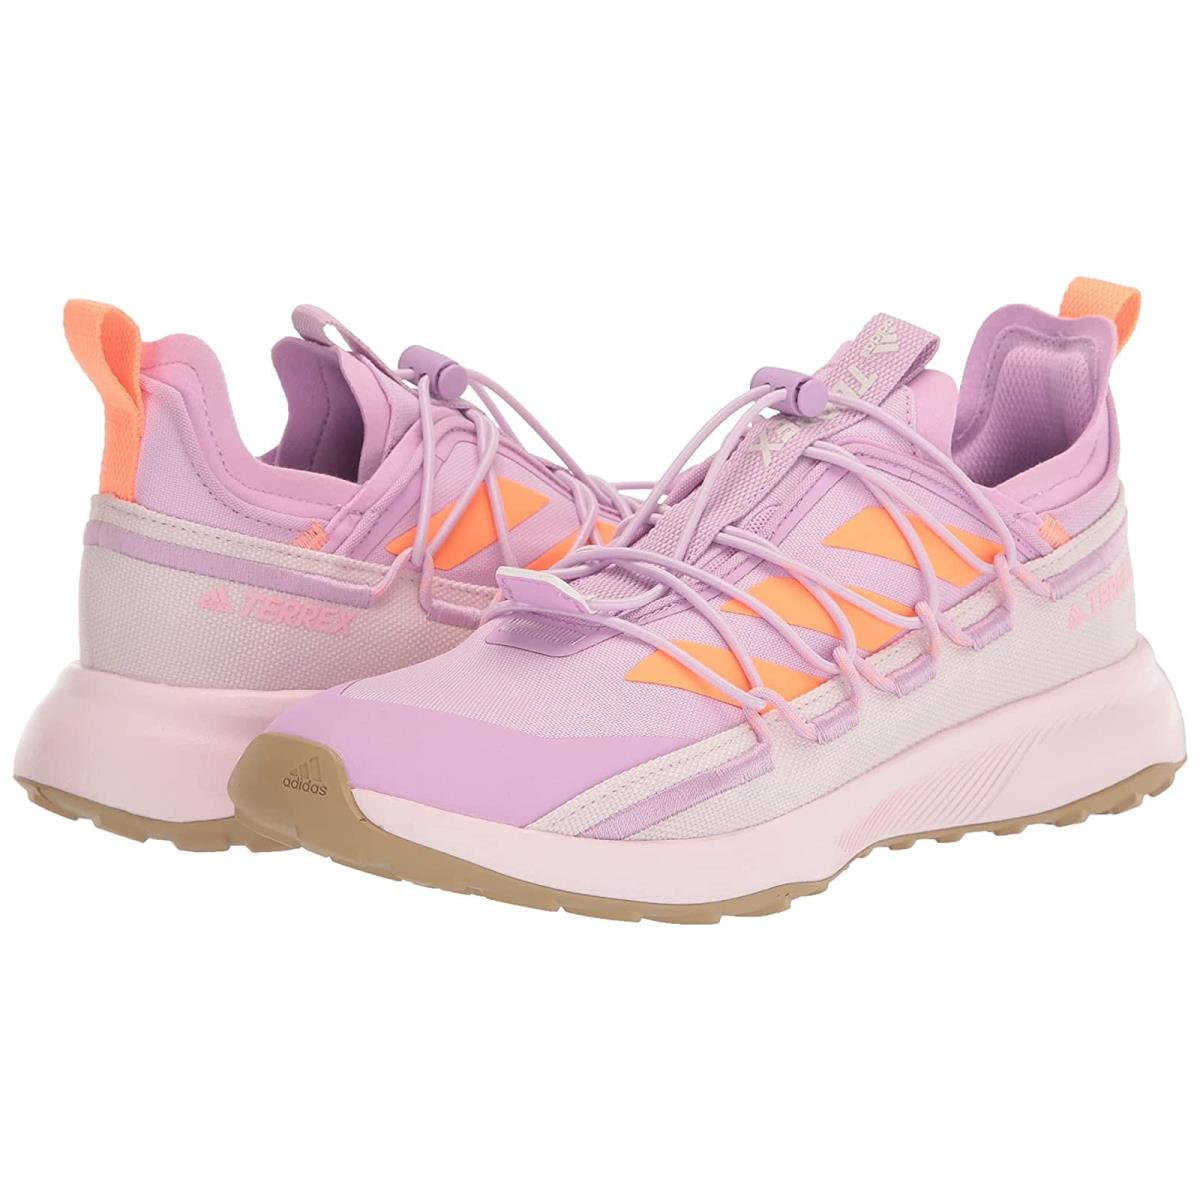 Woman`s Shoes Adidas Outdoor Terrex Voyager 21 Canvas Shoes Bliss Lilac/Beam Orange/Almost Pink